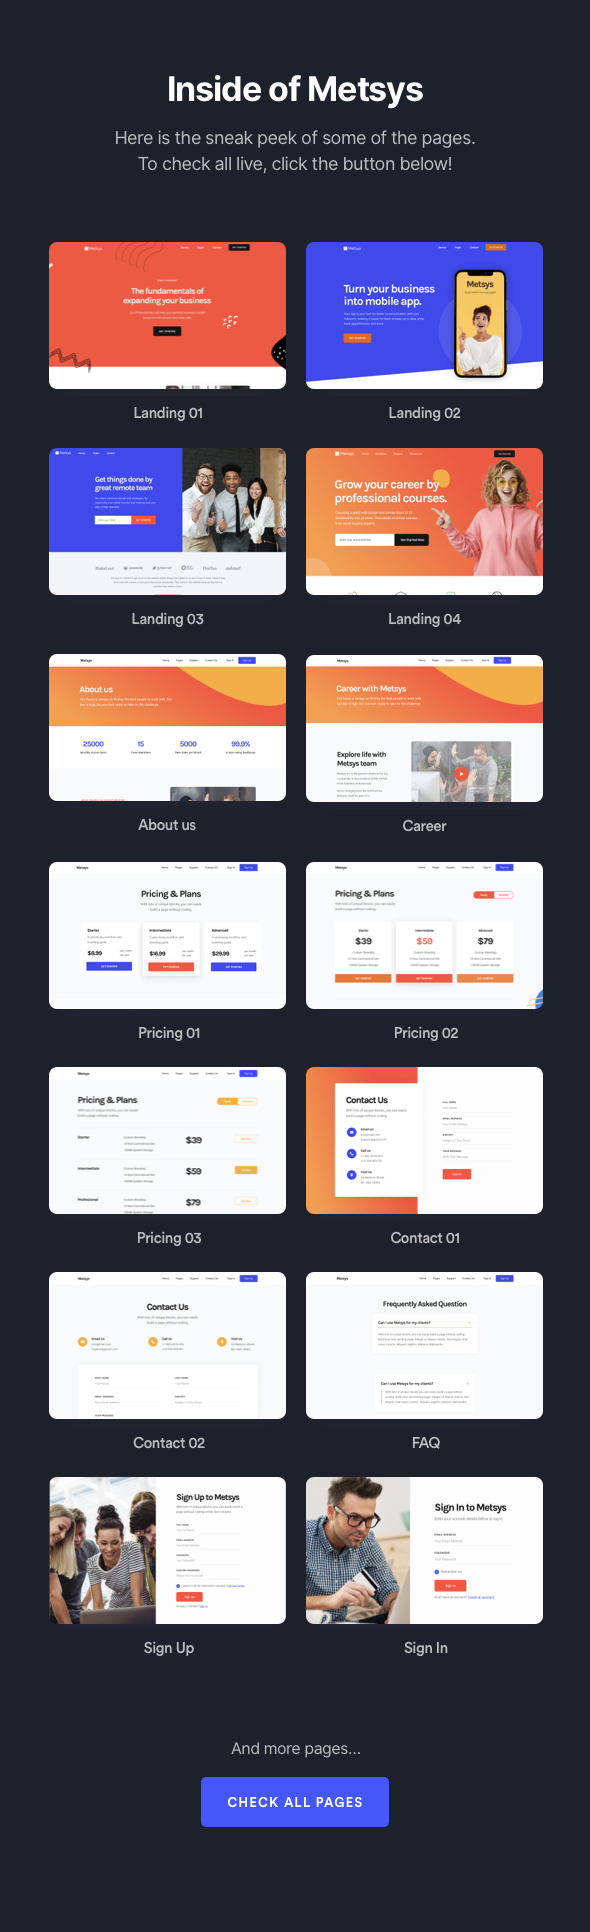 Metsys - Landing Page Template for SaaS, Startup & Agency - 3